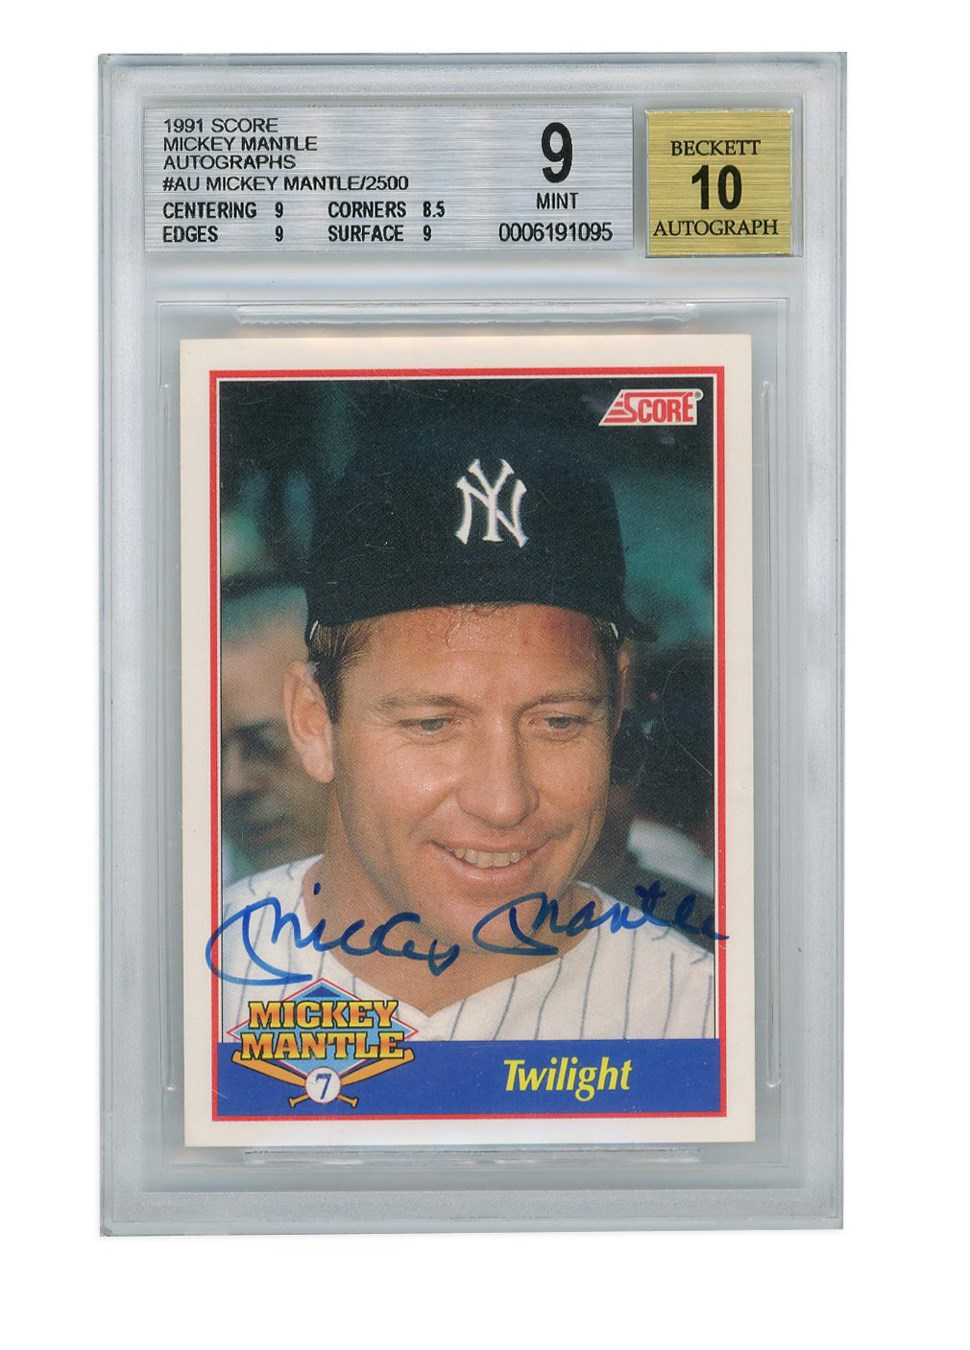 Baseball and Trading Cards - 1991 Score Mickey Mantle Autograph 7/2500 - Mantle's Uniform Number!